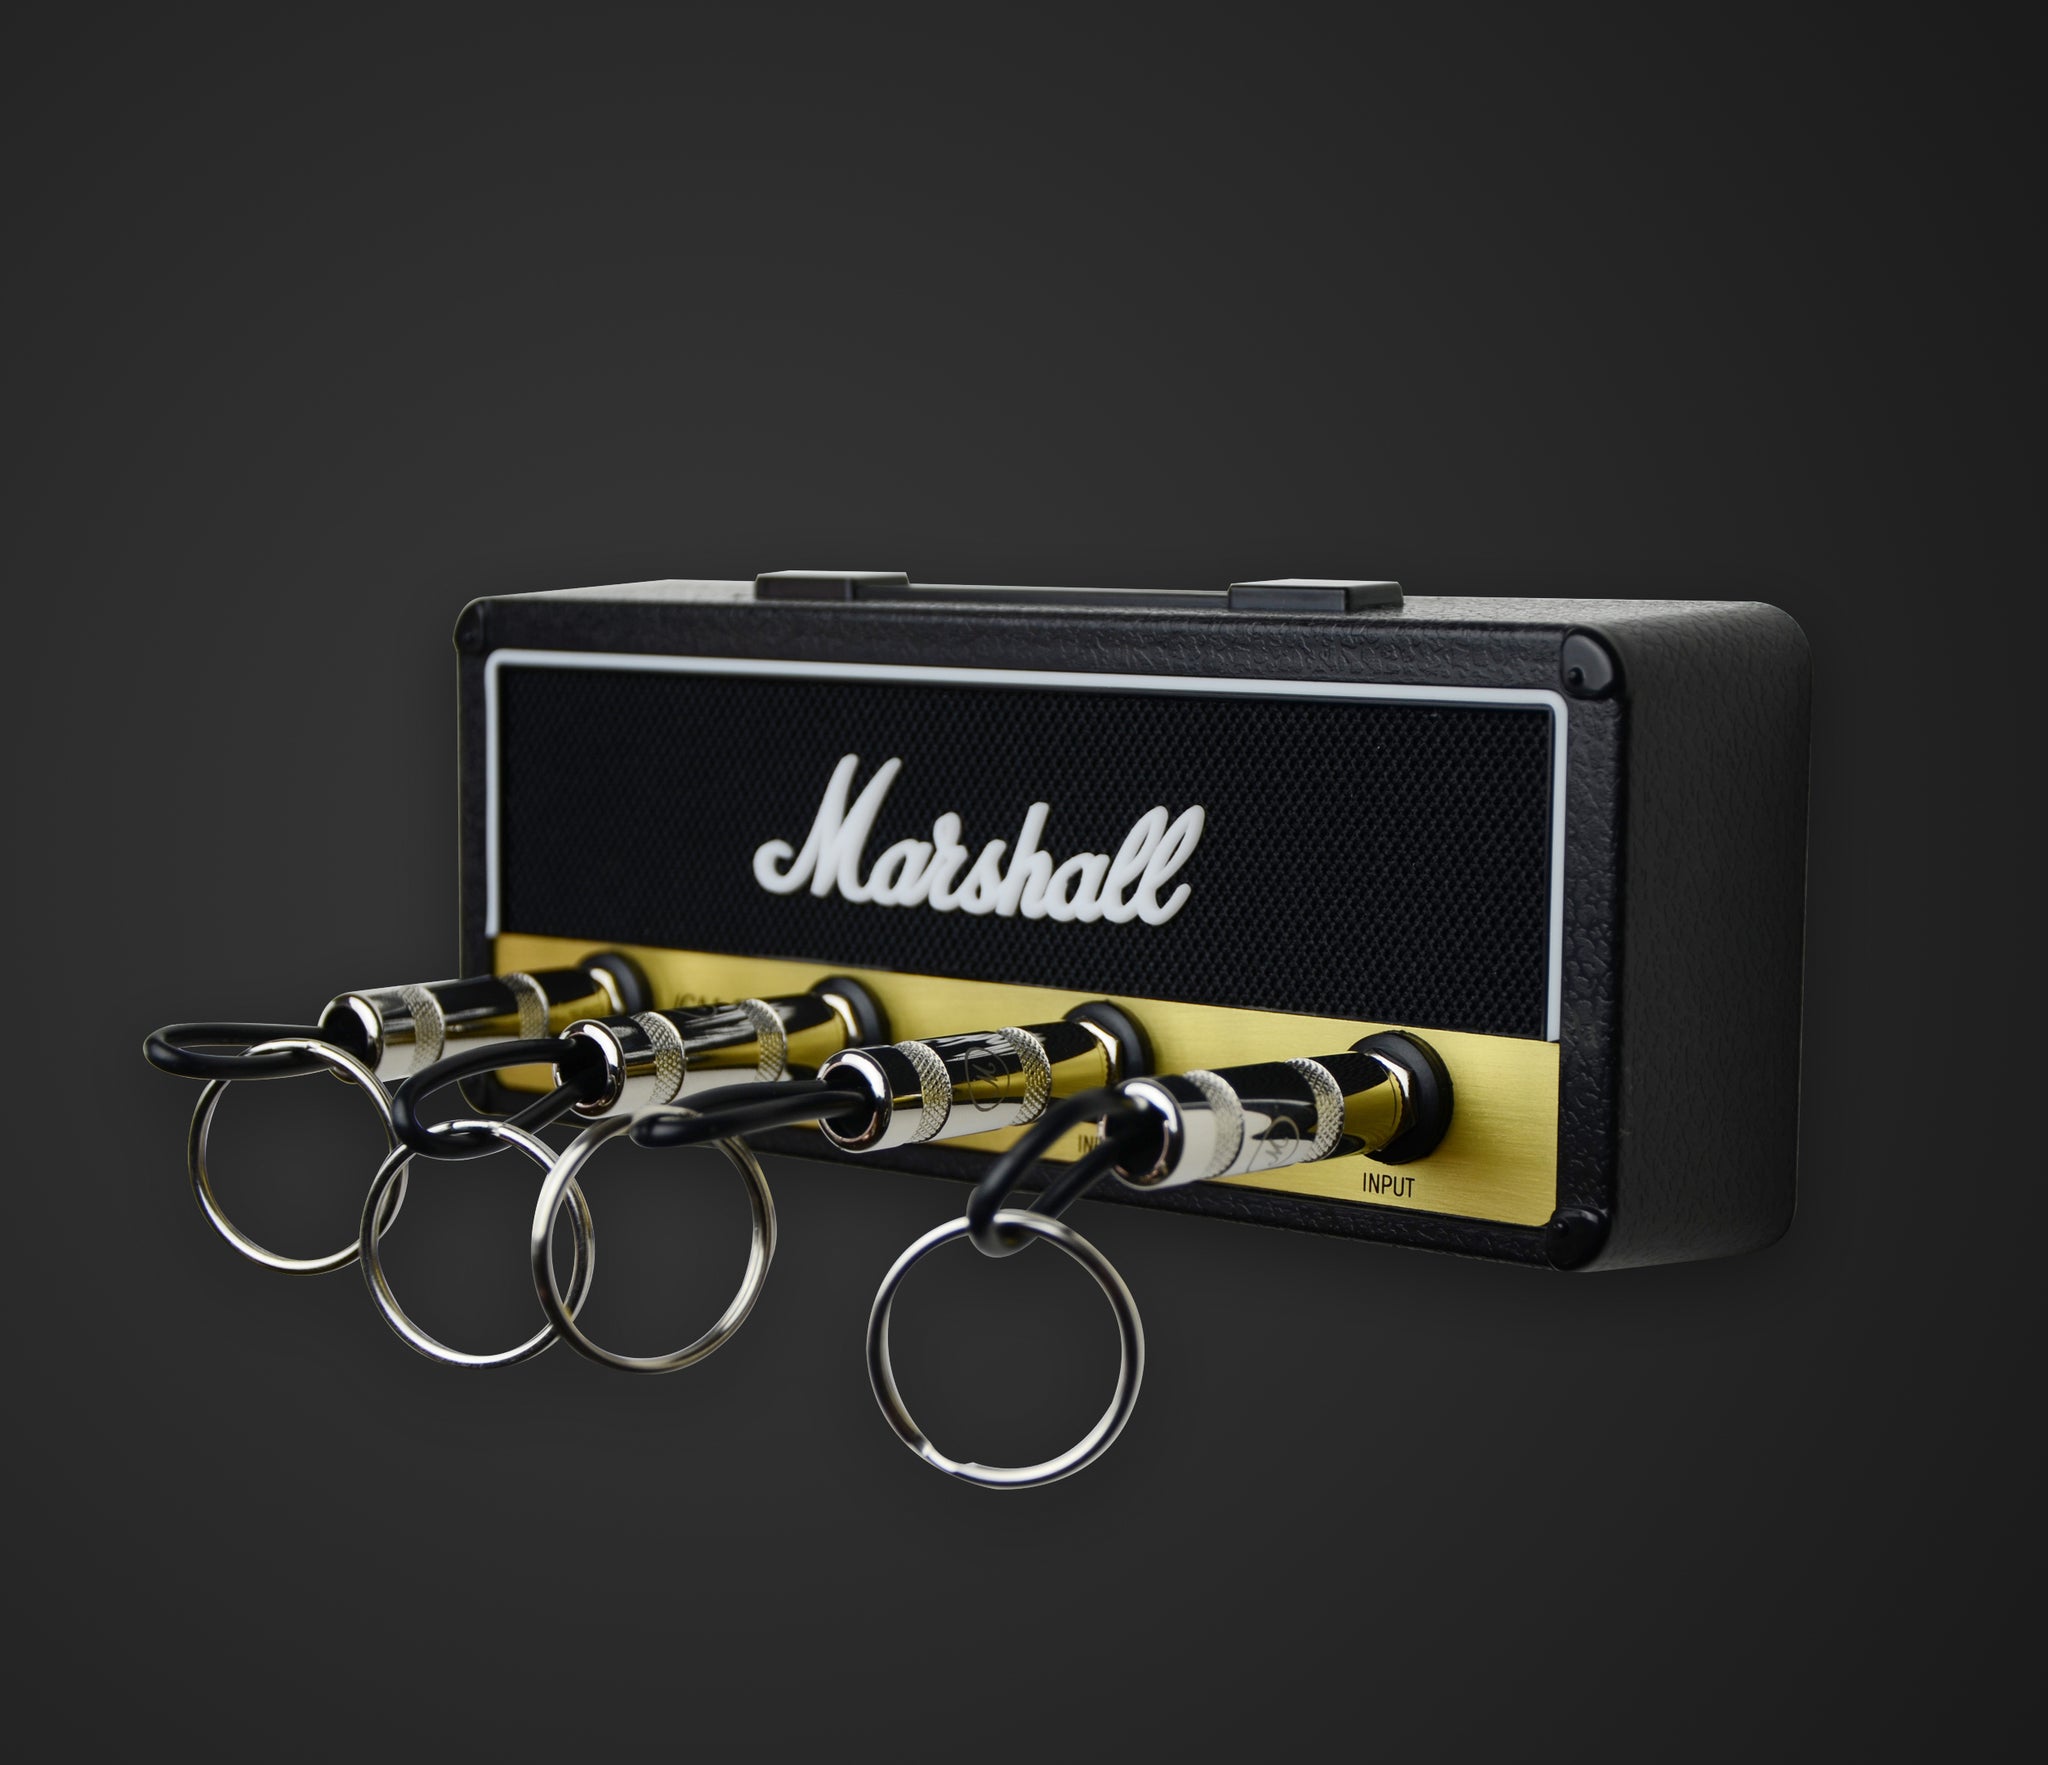 P Pluginz Licensed Marshall Stealth Jack Rack- Wall mounting Guitar amp Key  Hanger. Includes 4 Guitar Plug Keychains and 1 Wall mounting kit. Easy